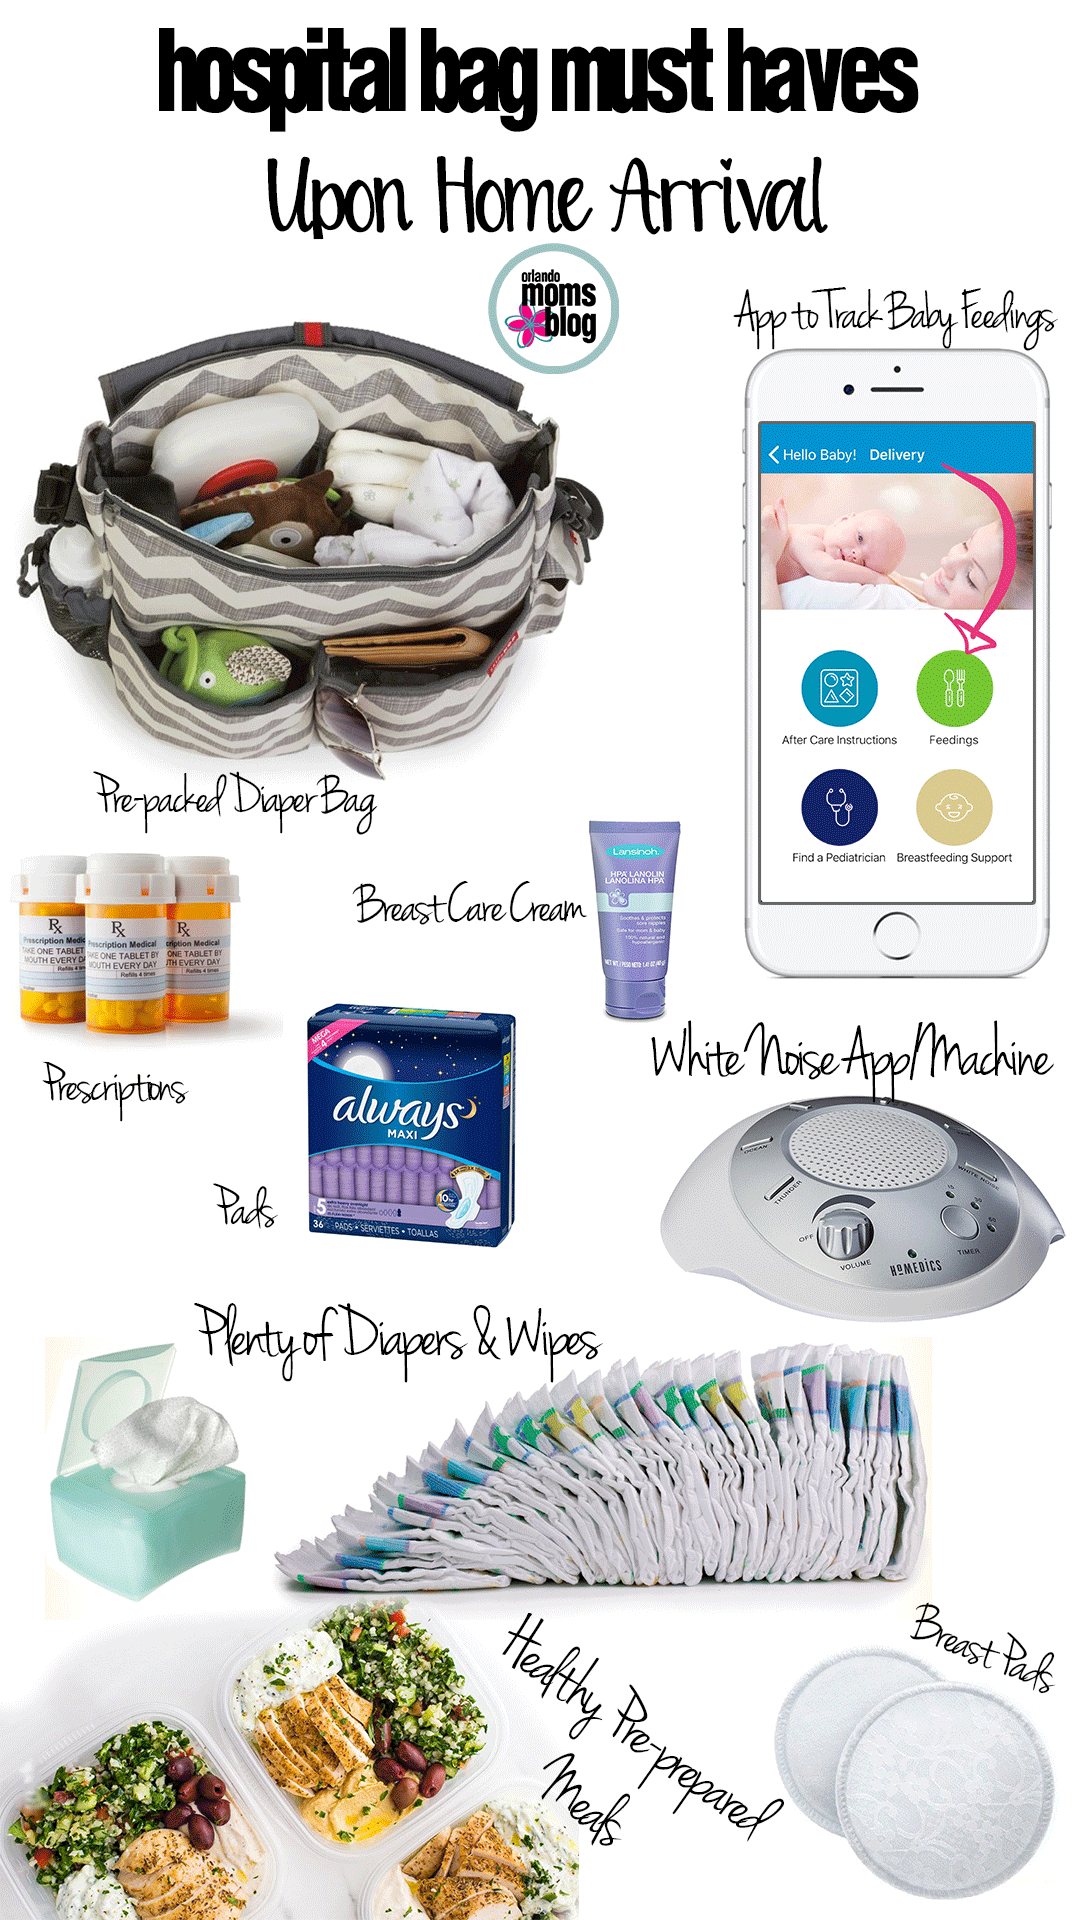 https://orlando.momcollective.com/wp-content/uploads/2018/10/Hospital-Bag-Must-Haves-3.png